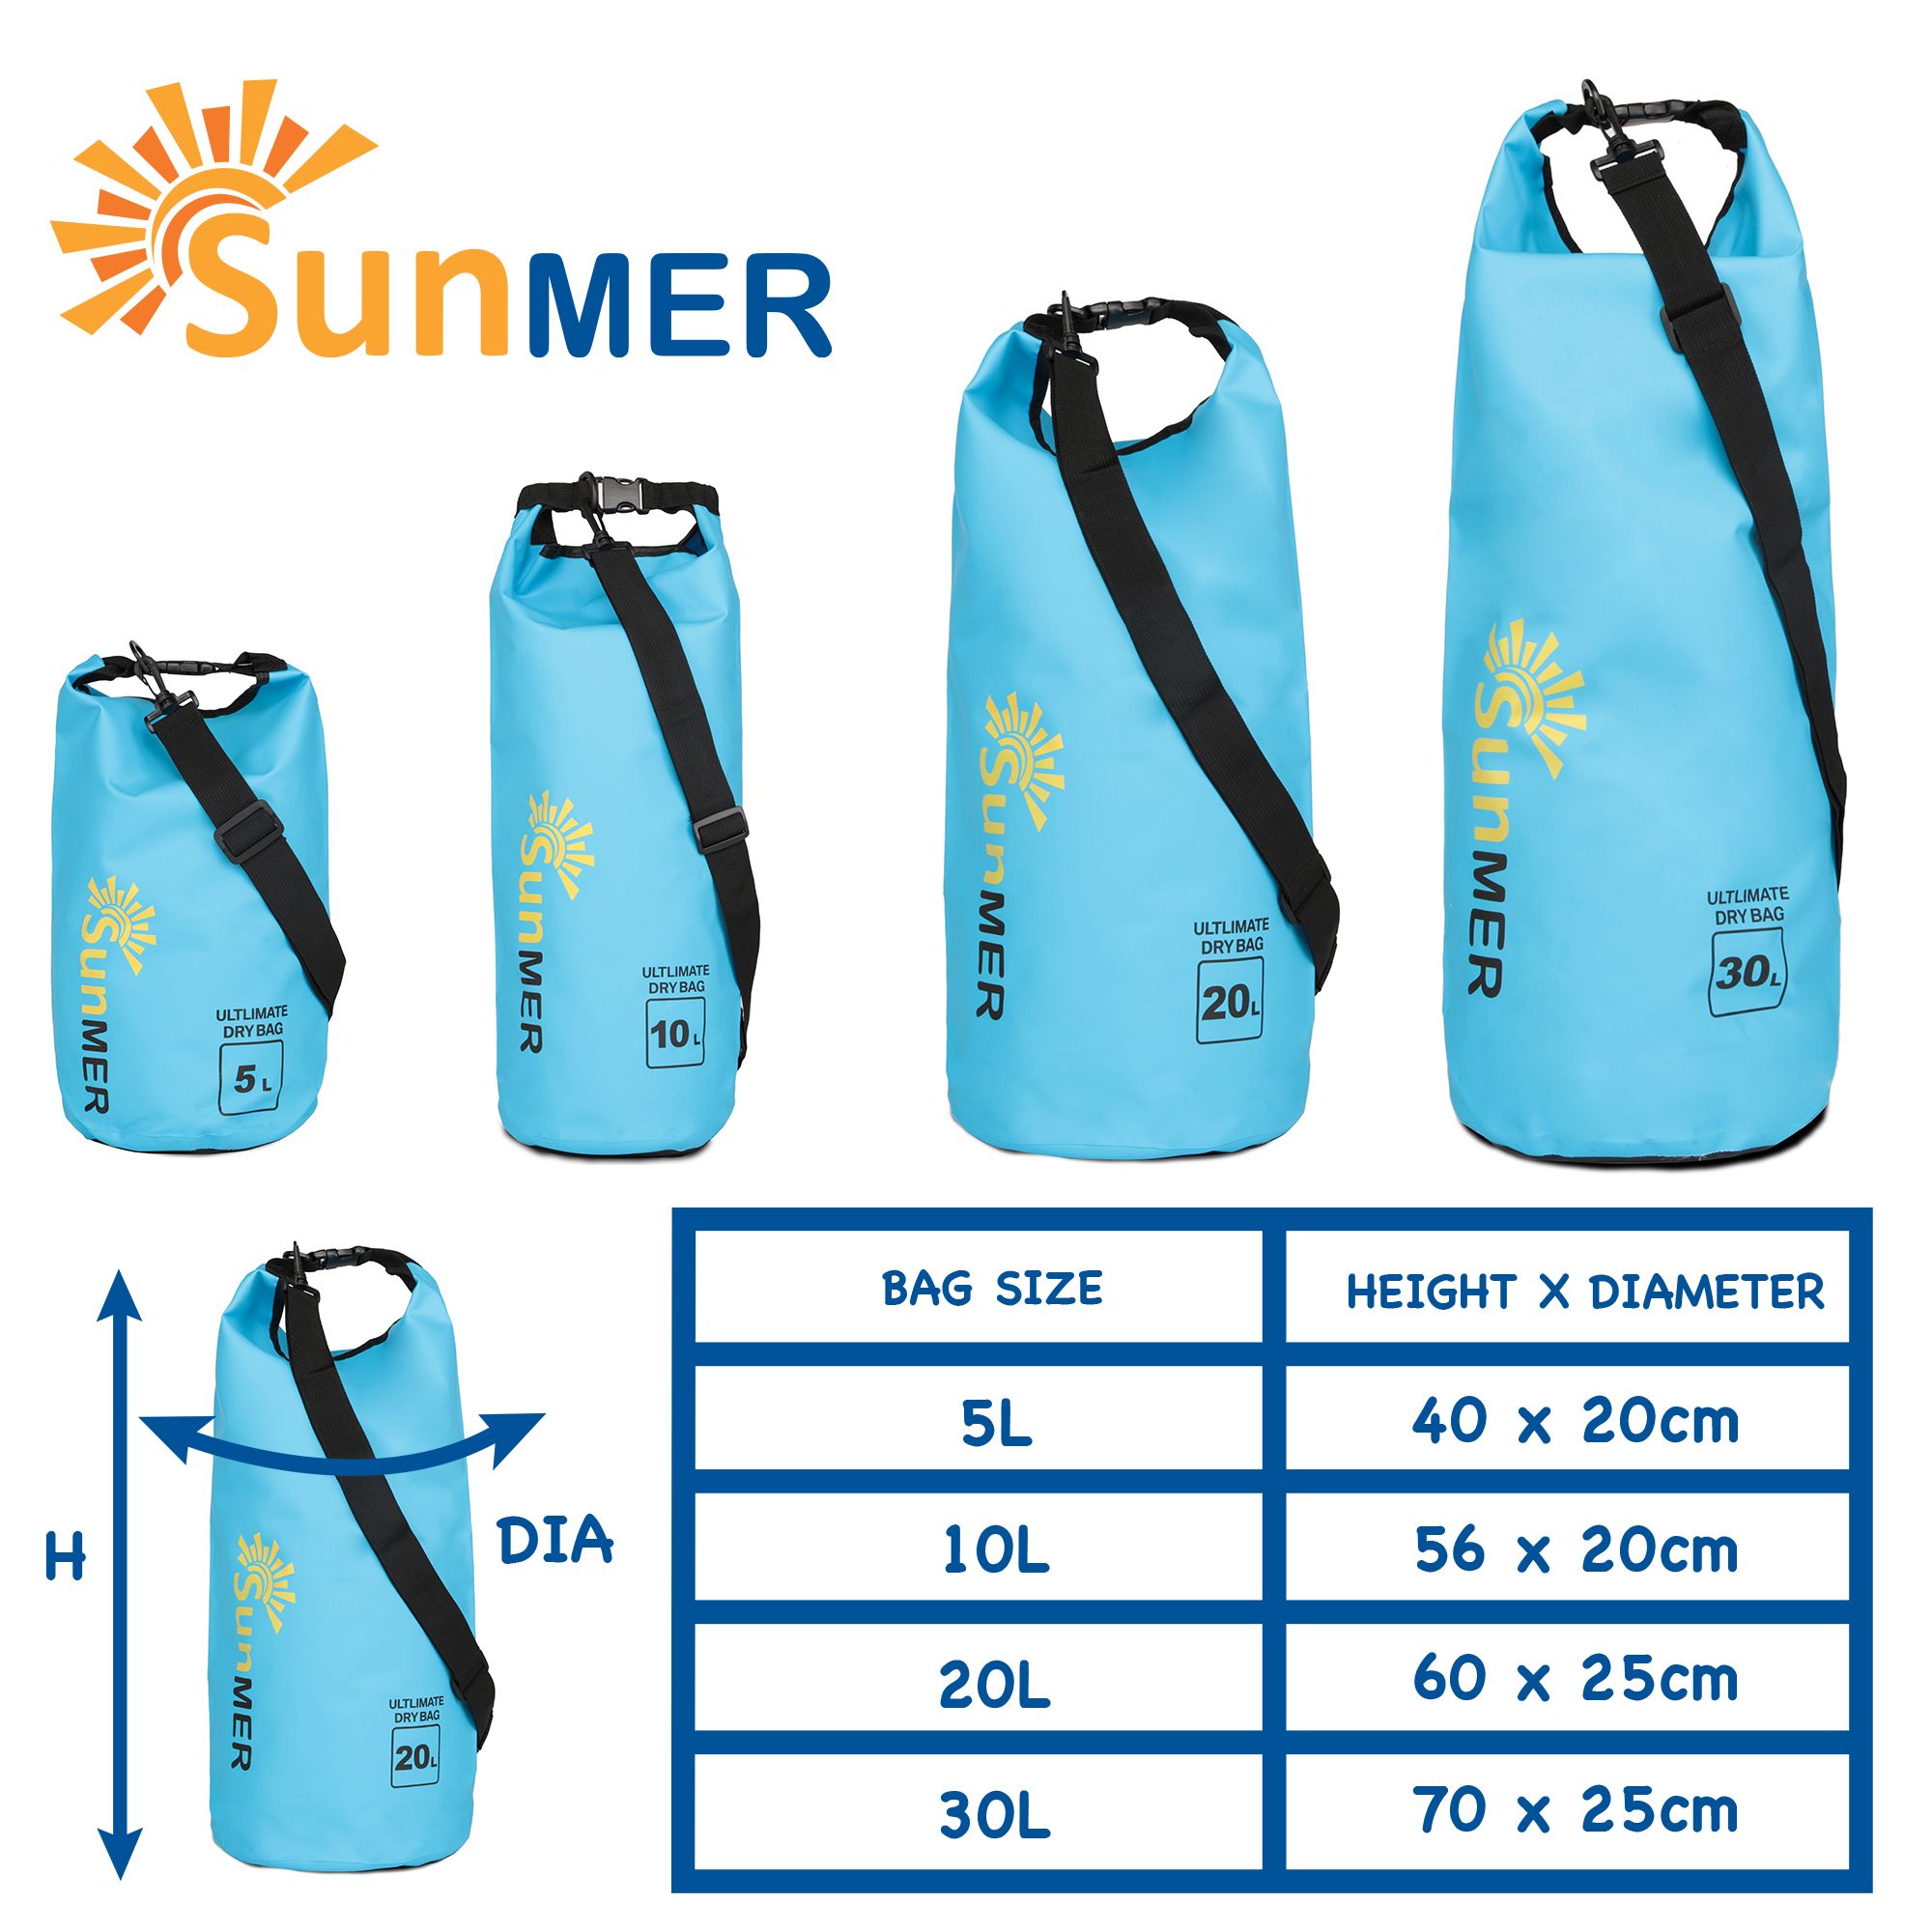 SUNMER 30L Dry Bag With Waterproof Phone Case - Blue